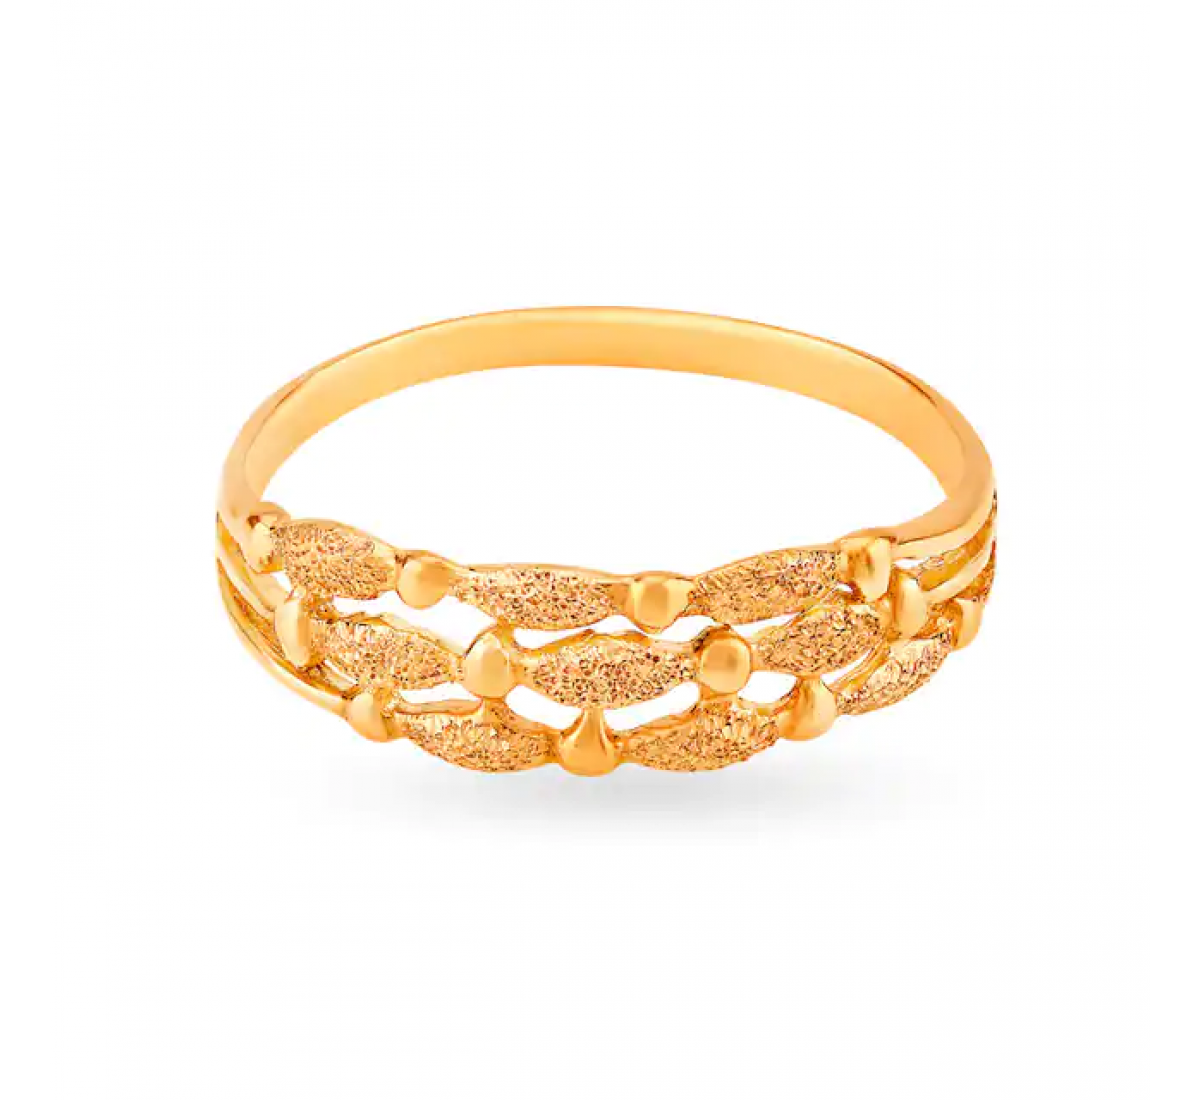 The Regal Three Layered Gold Ring